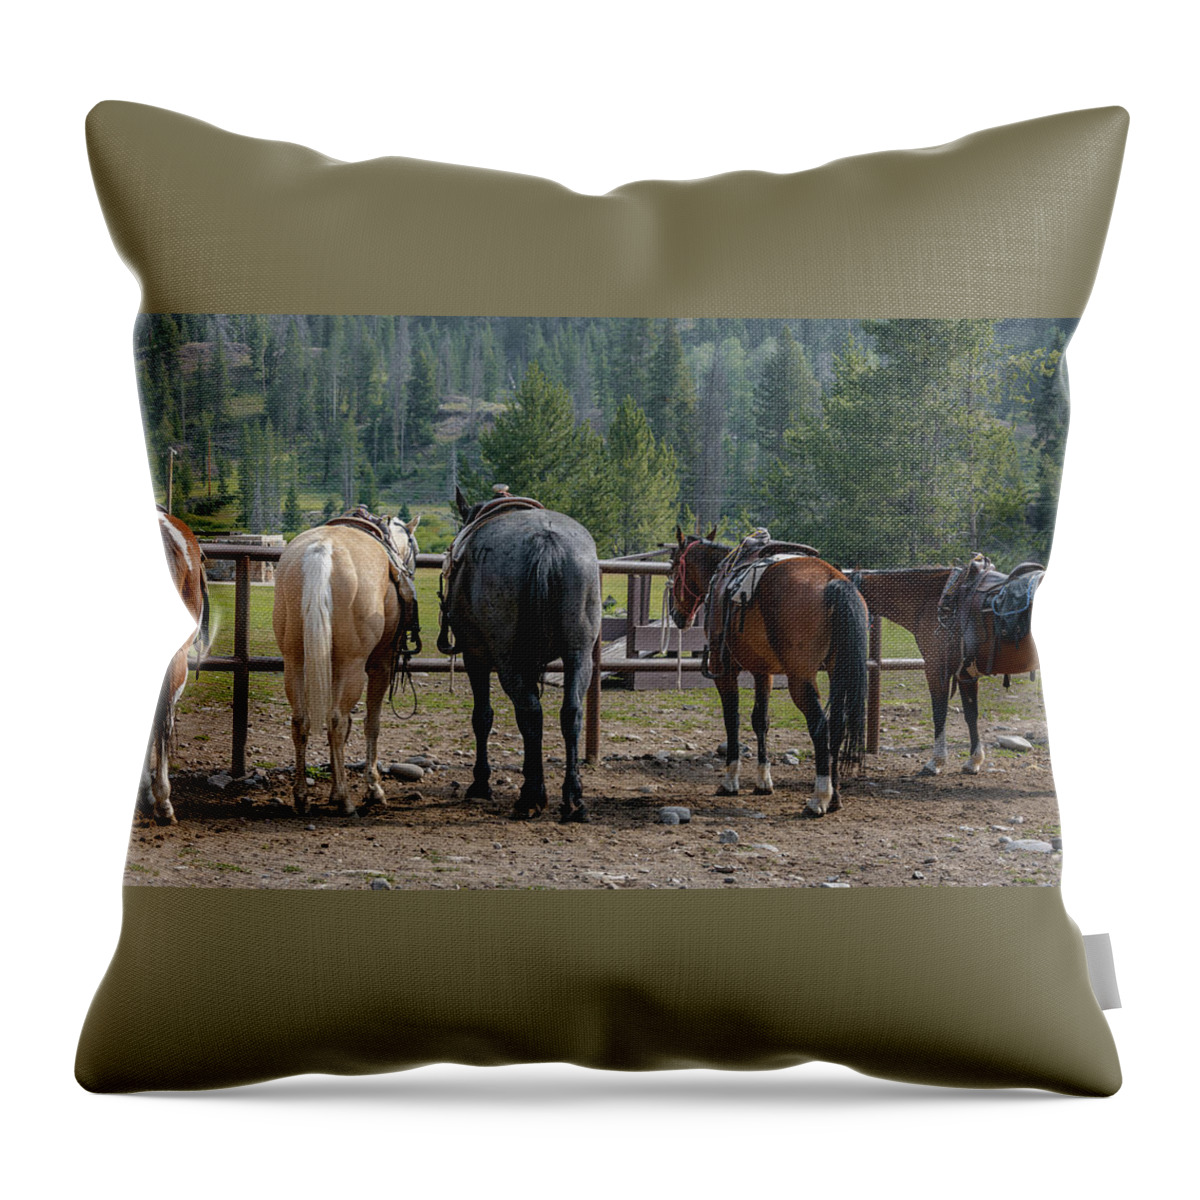 Horse Throw Pillow featuring the photograph Ready To Ride by Steve Kelley